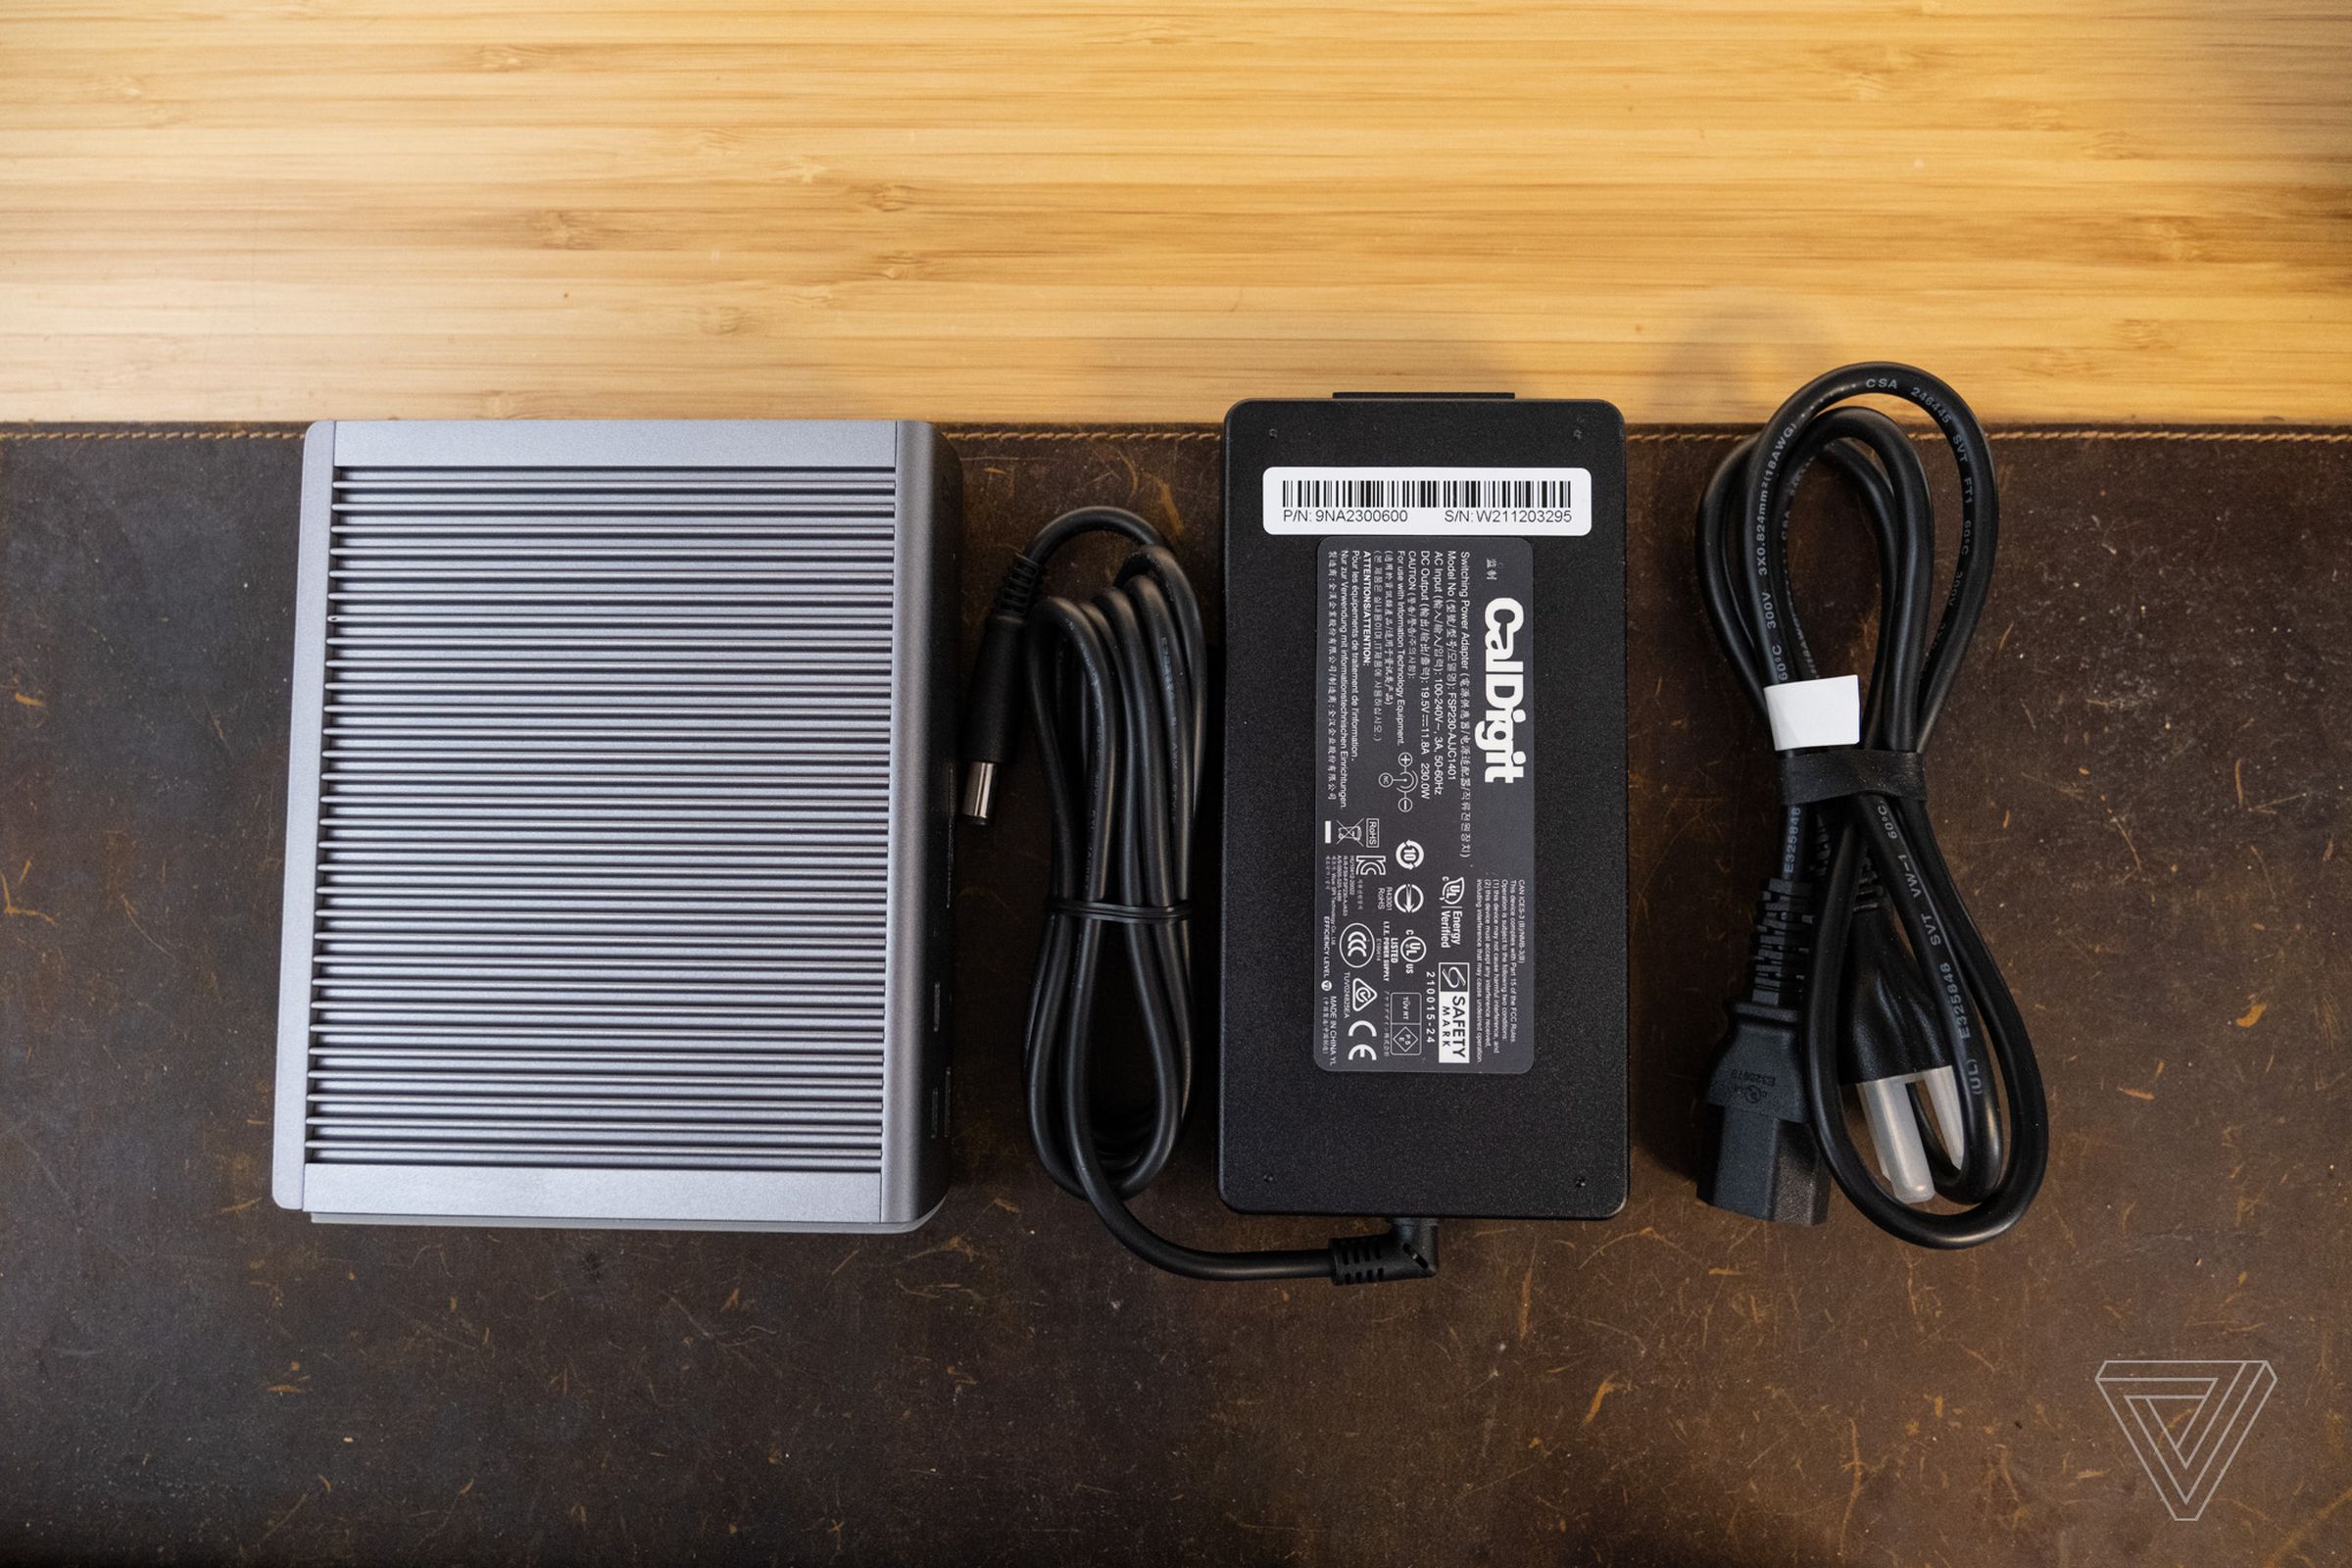 The TS4 uses a large external power brick to provide juice for a laptop and many accessories.